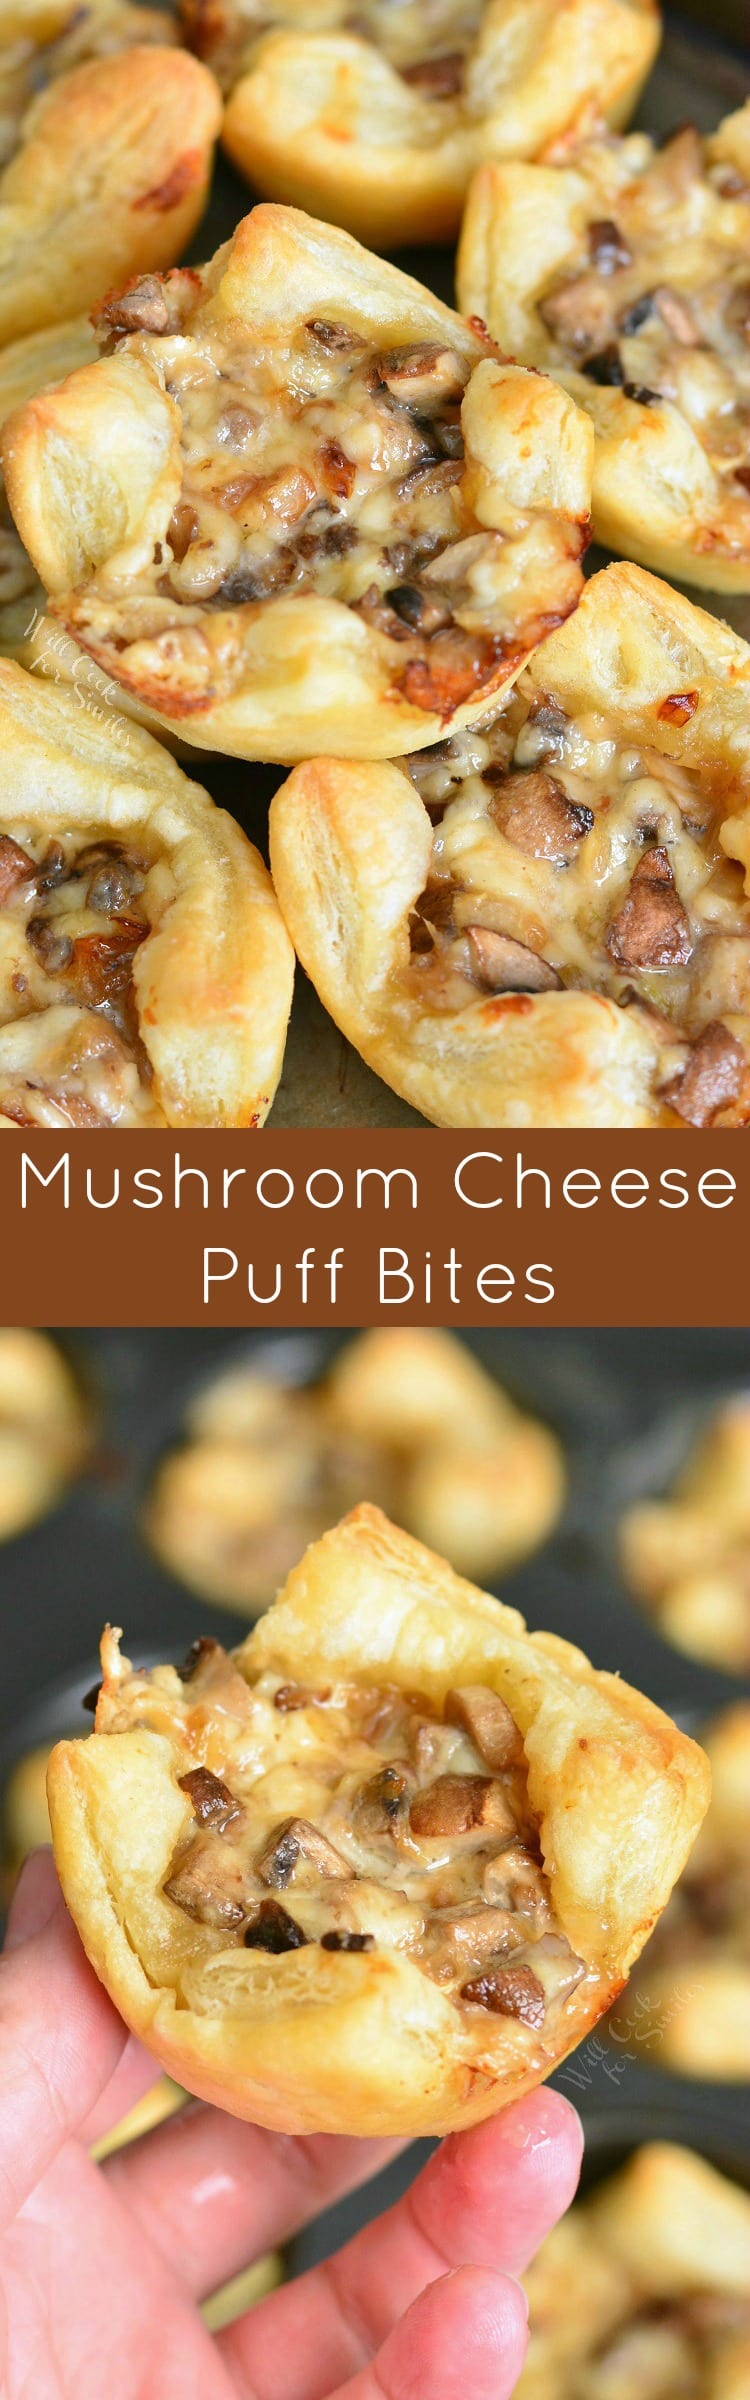 Mushroom Cheese Puff Bites stacked on a baking sheet in a collage 